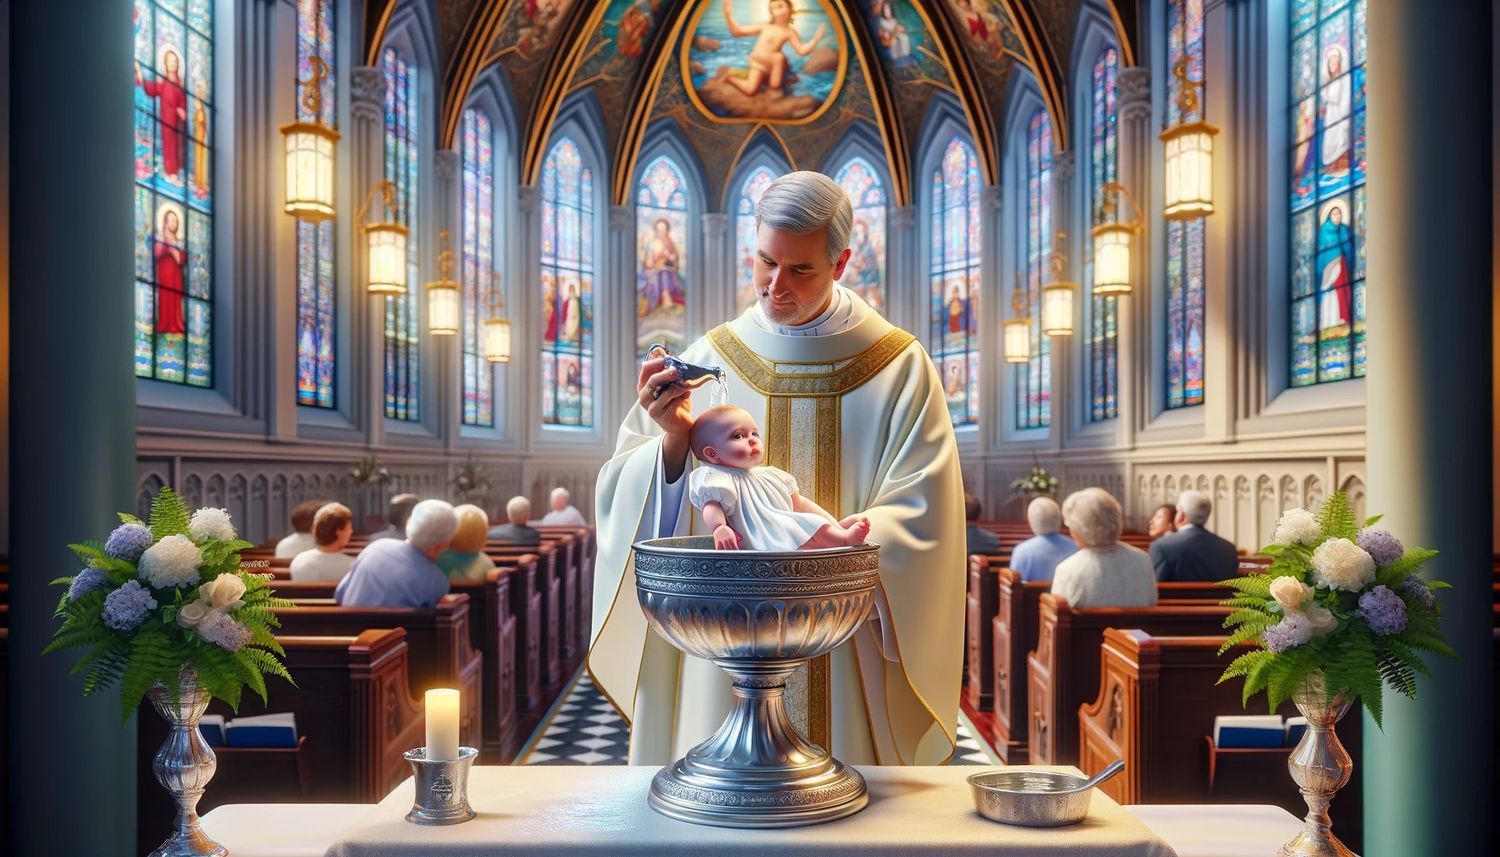 What Baptisms Does The Catholic Church Recognize?